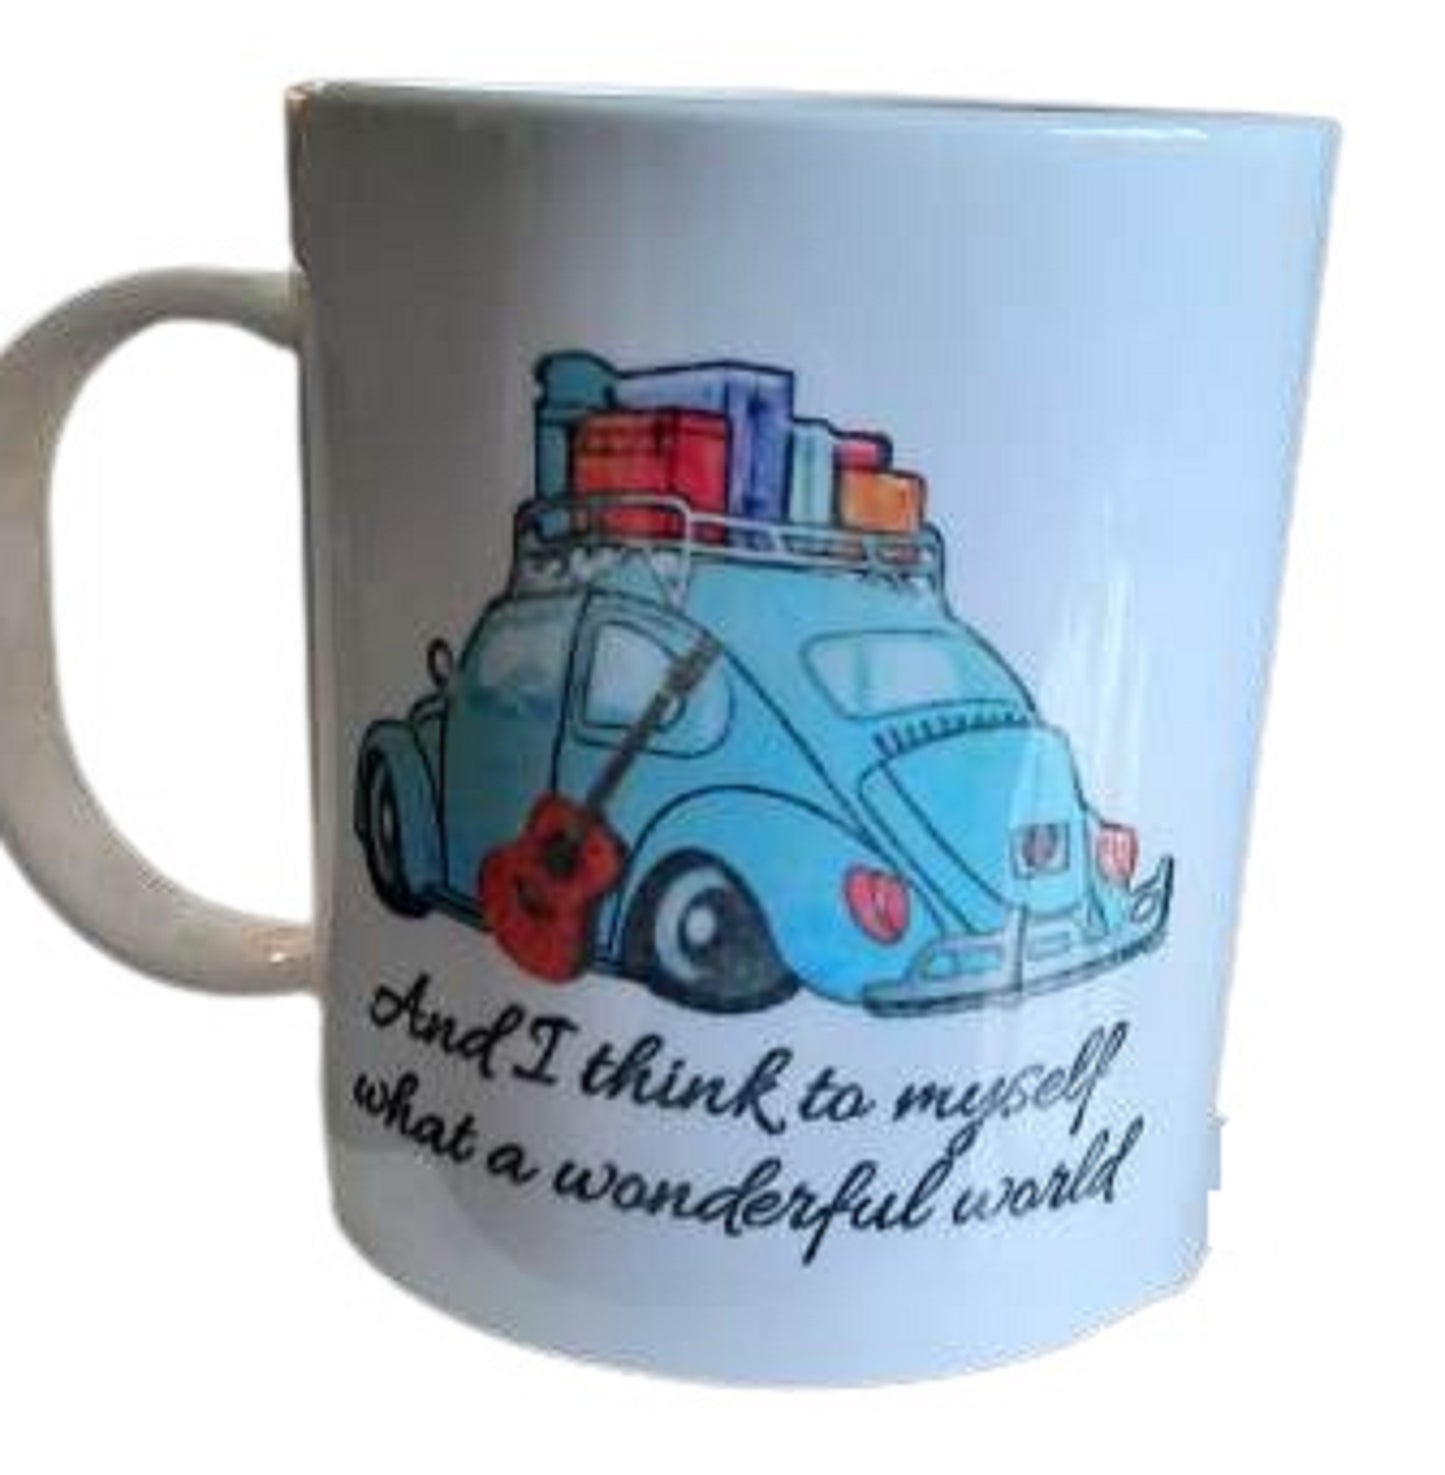  Classic Beetle Camping Mug in Polymer by Free Spirit Accessories sold by Free Spirit Accessories